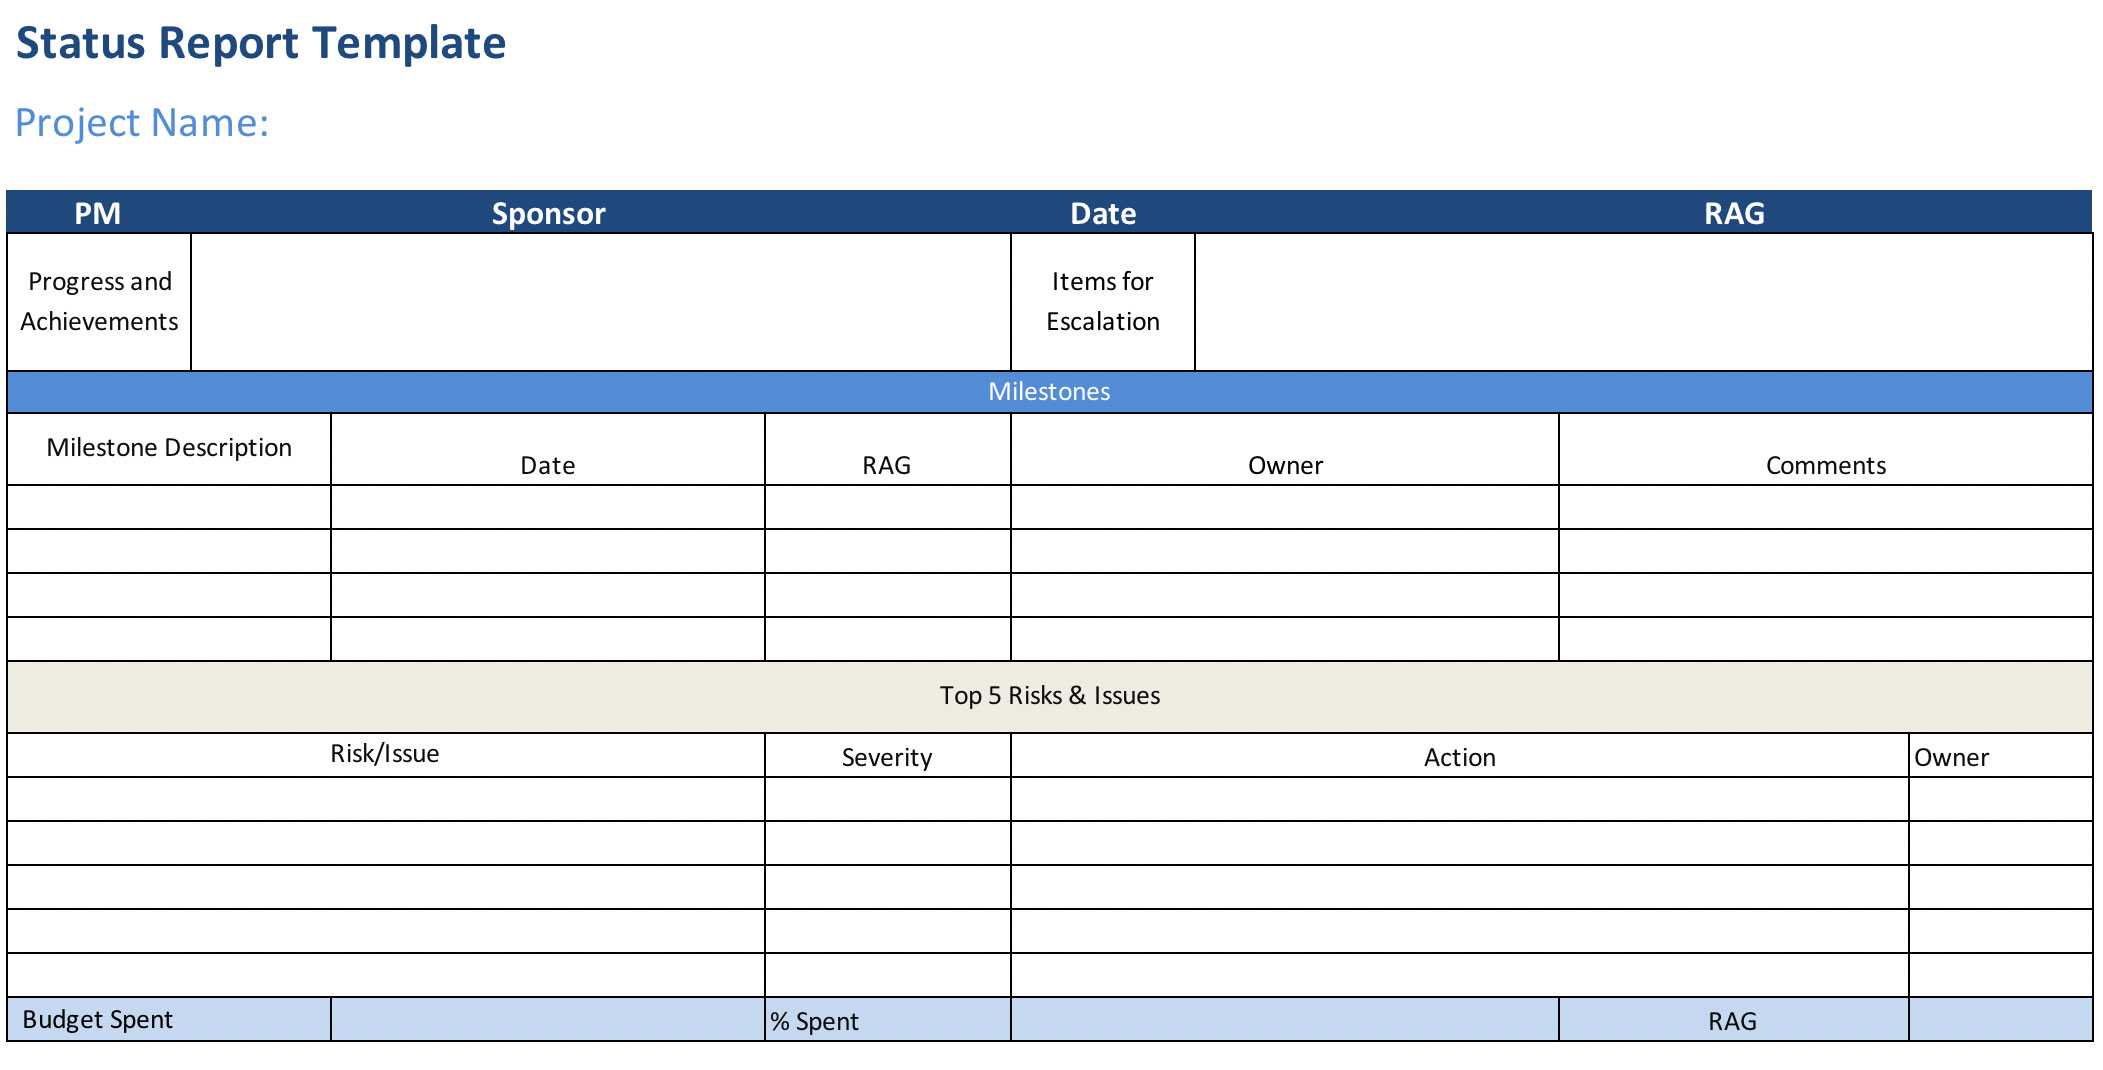 Project Status Report (Free Excel Template) – Projectmanager Throughout Construction Daily Progress Report Template